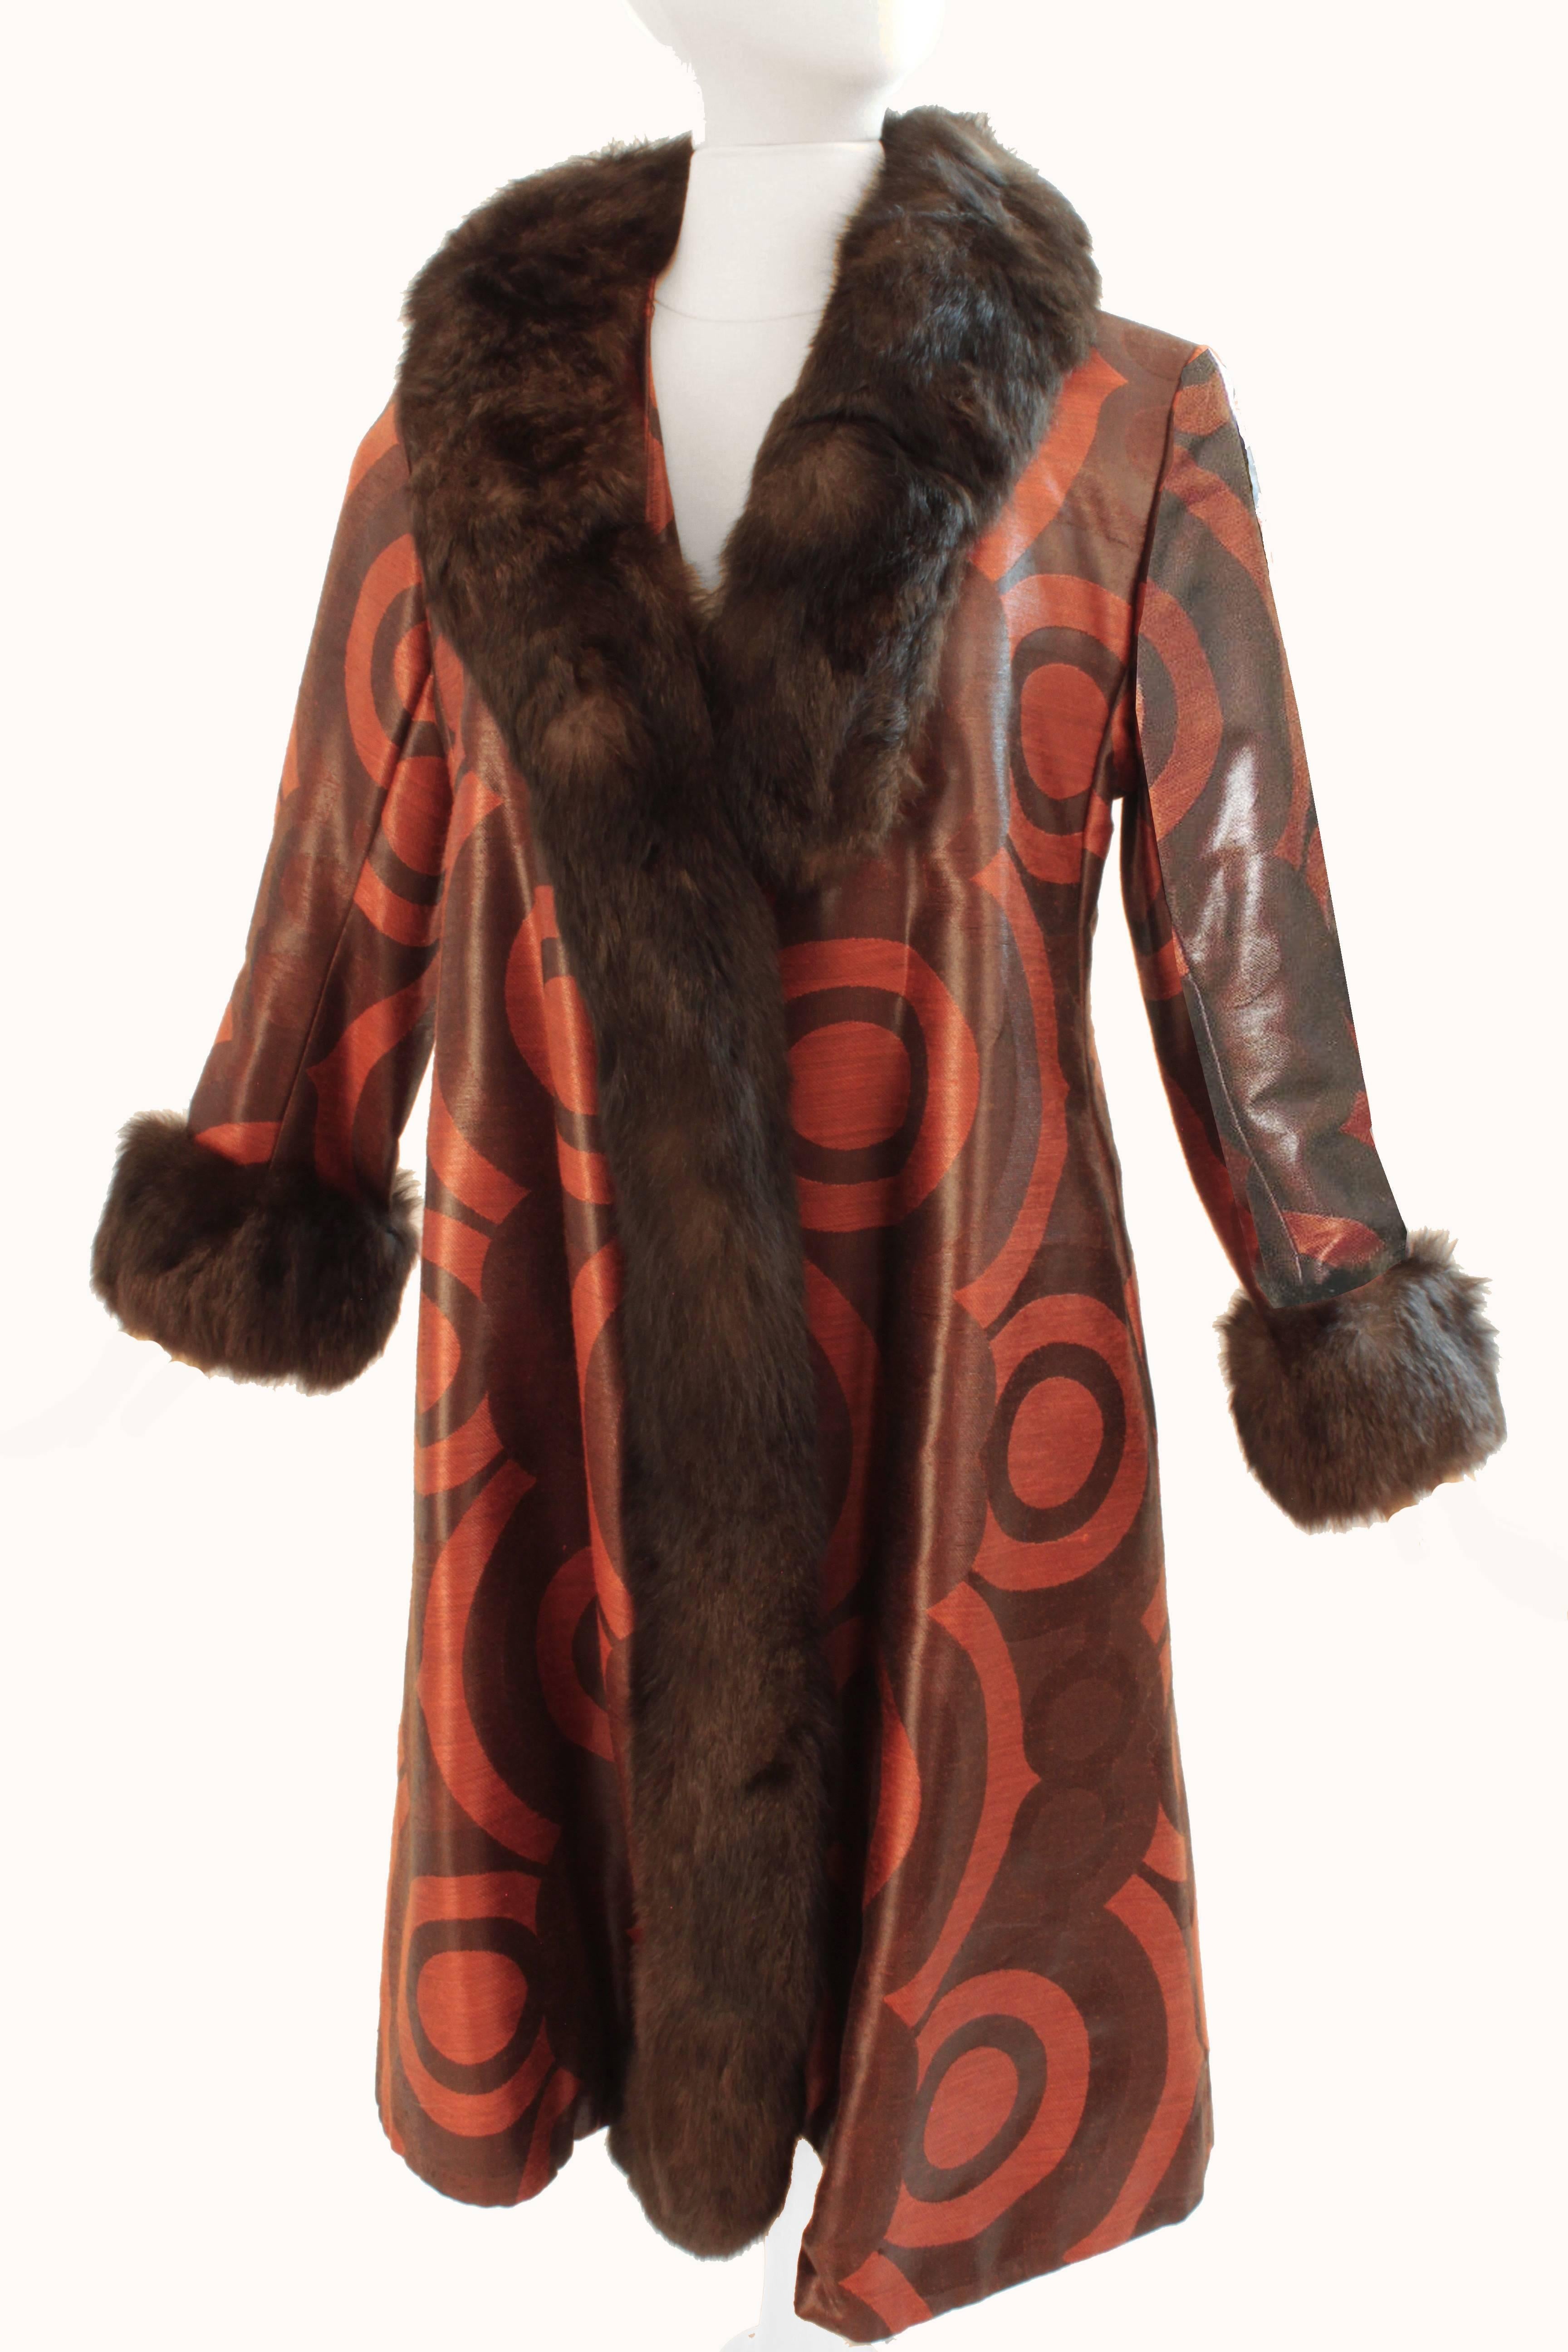 This fabulous coat was made by Bill Blass for Bond Street in the 1960s.  Made from what we believe is a coated silk weave (no content tag), it features a brilliant orange red bulls-eye motif against a deep brown background, and is trimmed in dark